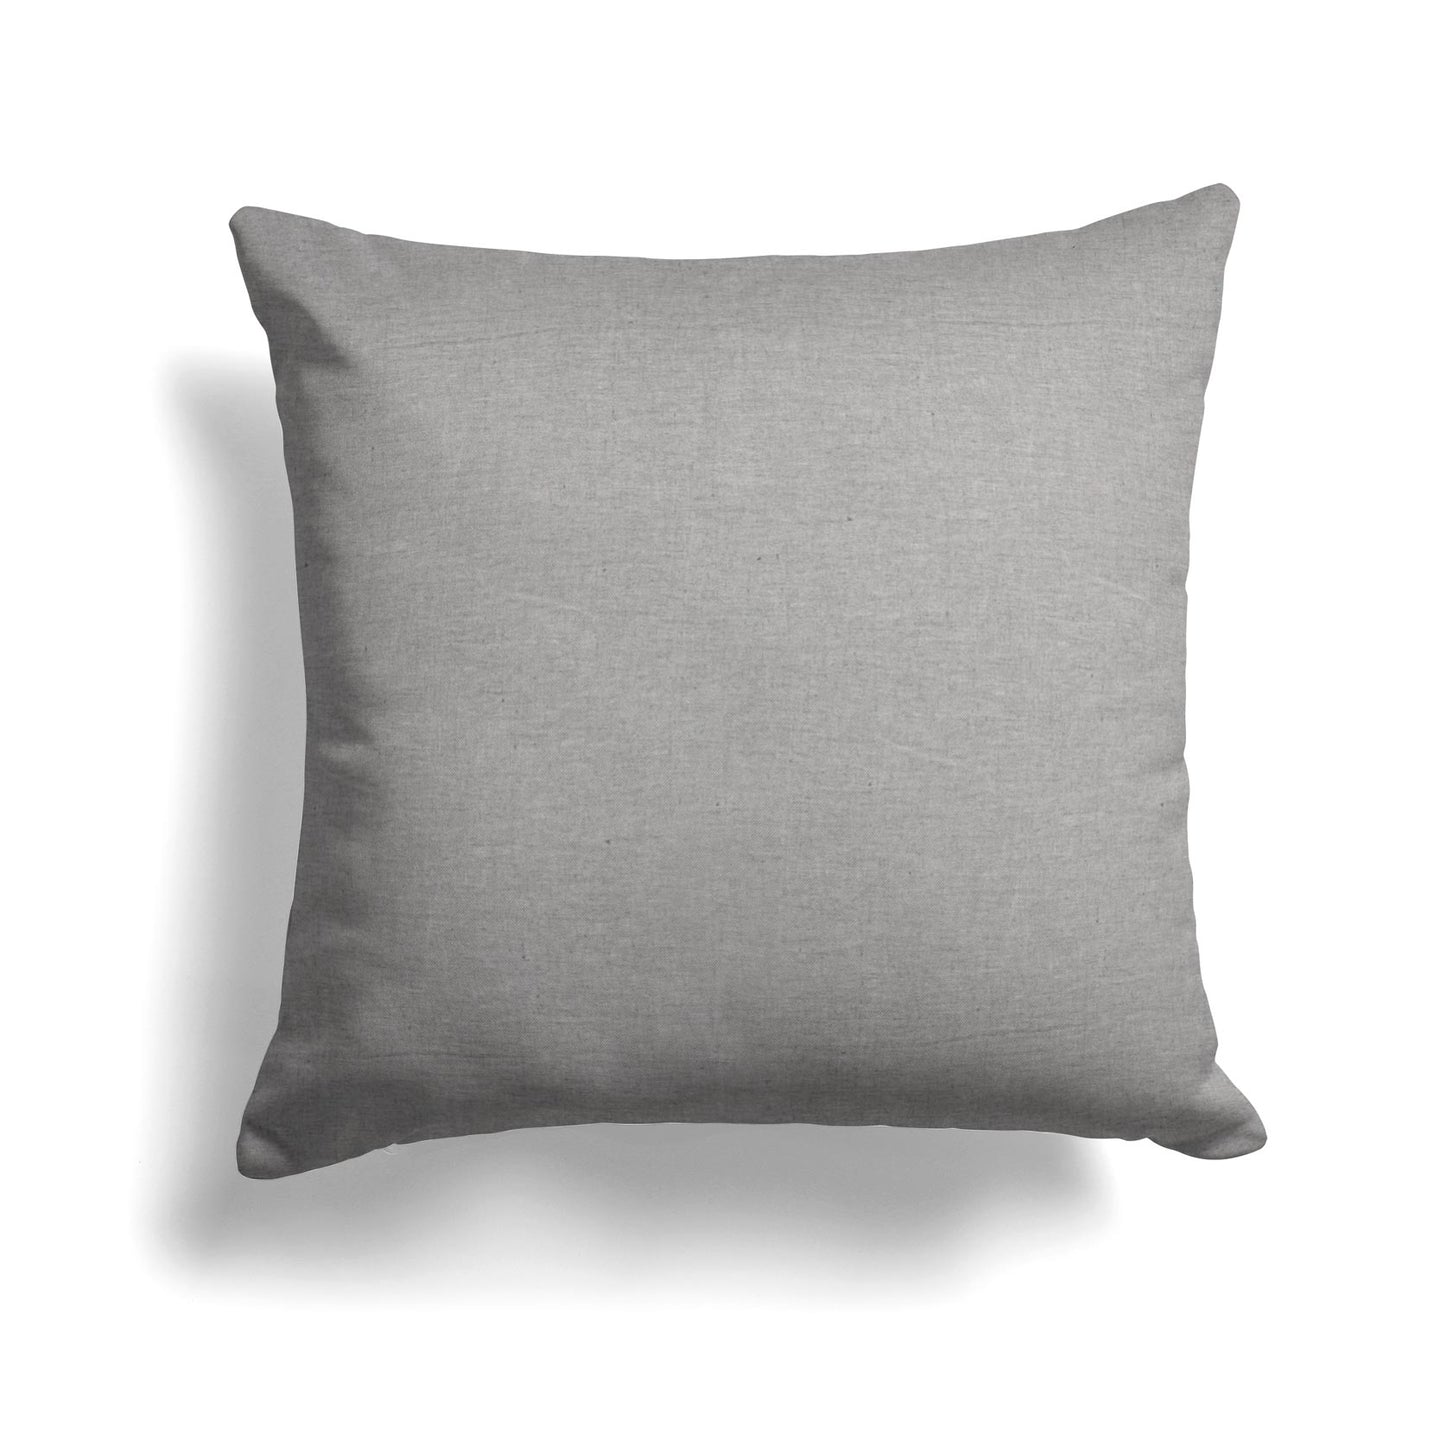 Stone Washed Linen Pillow Cover in Graphite